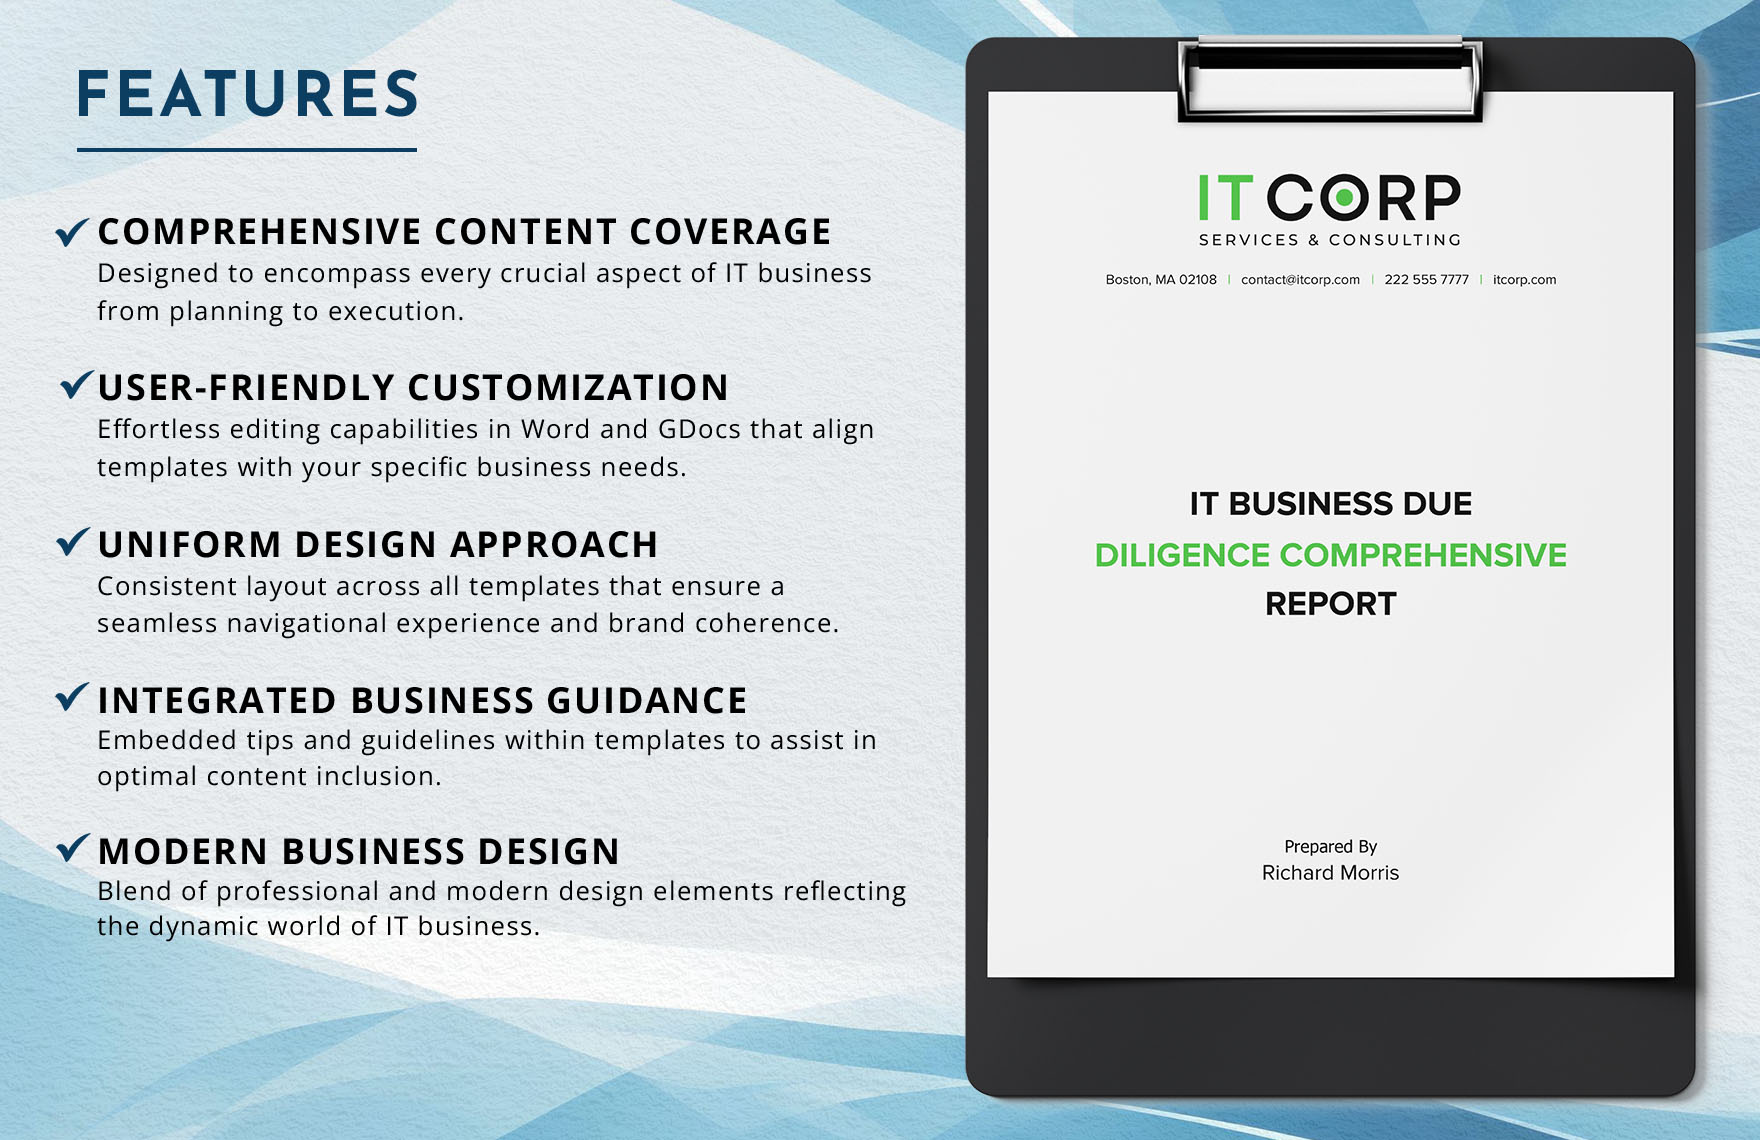 IT Business Due Diligence Comprehensive Report Template